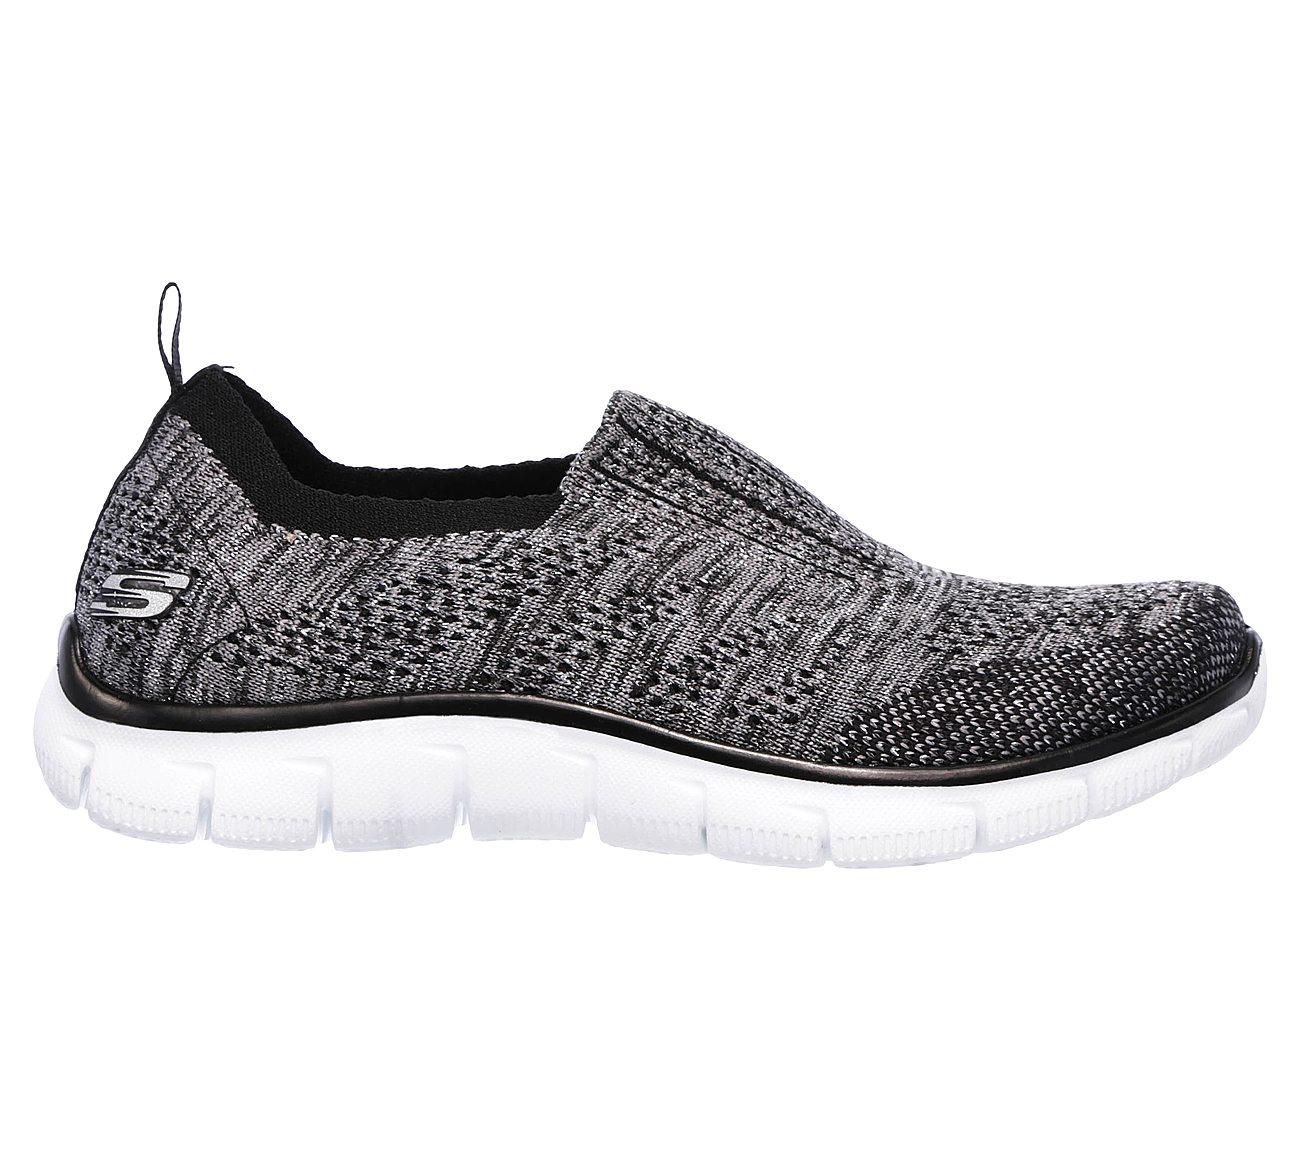 Round Up SKECHERS Relaxed Fit Shoes